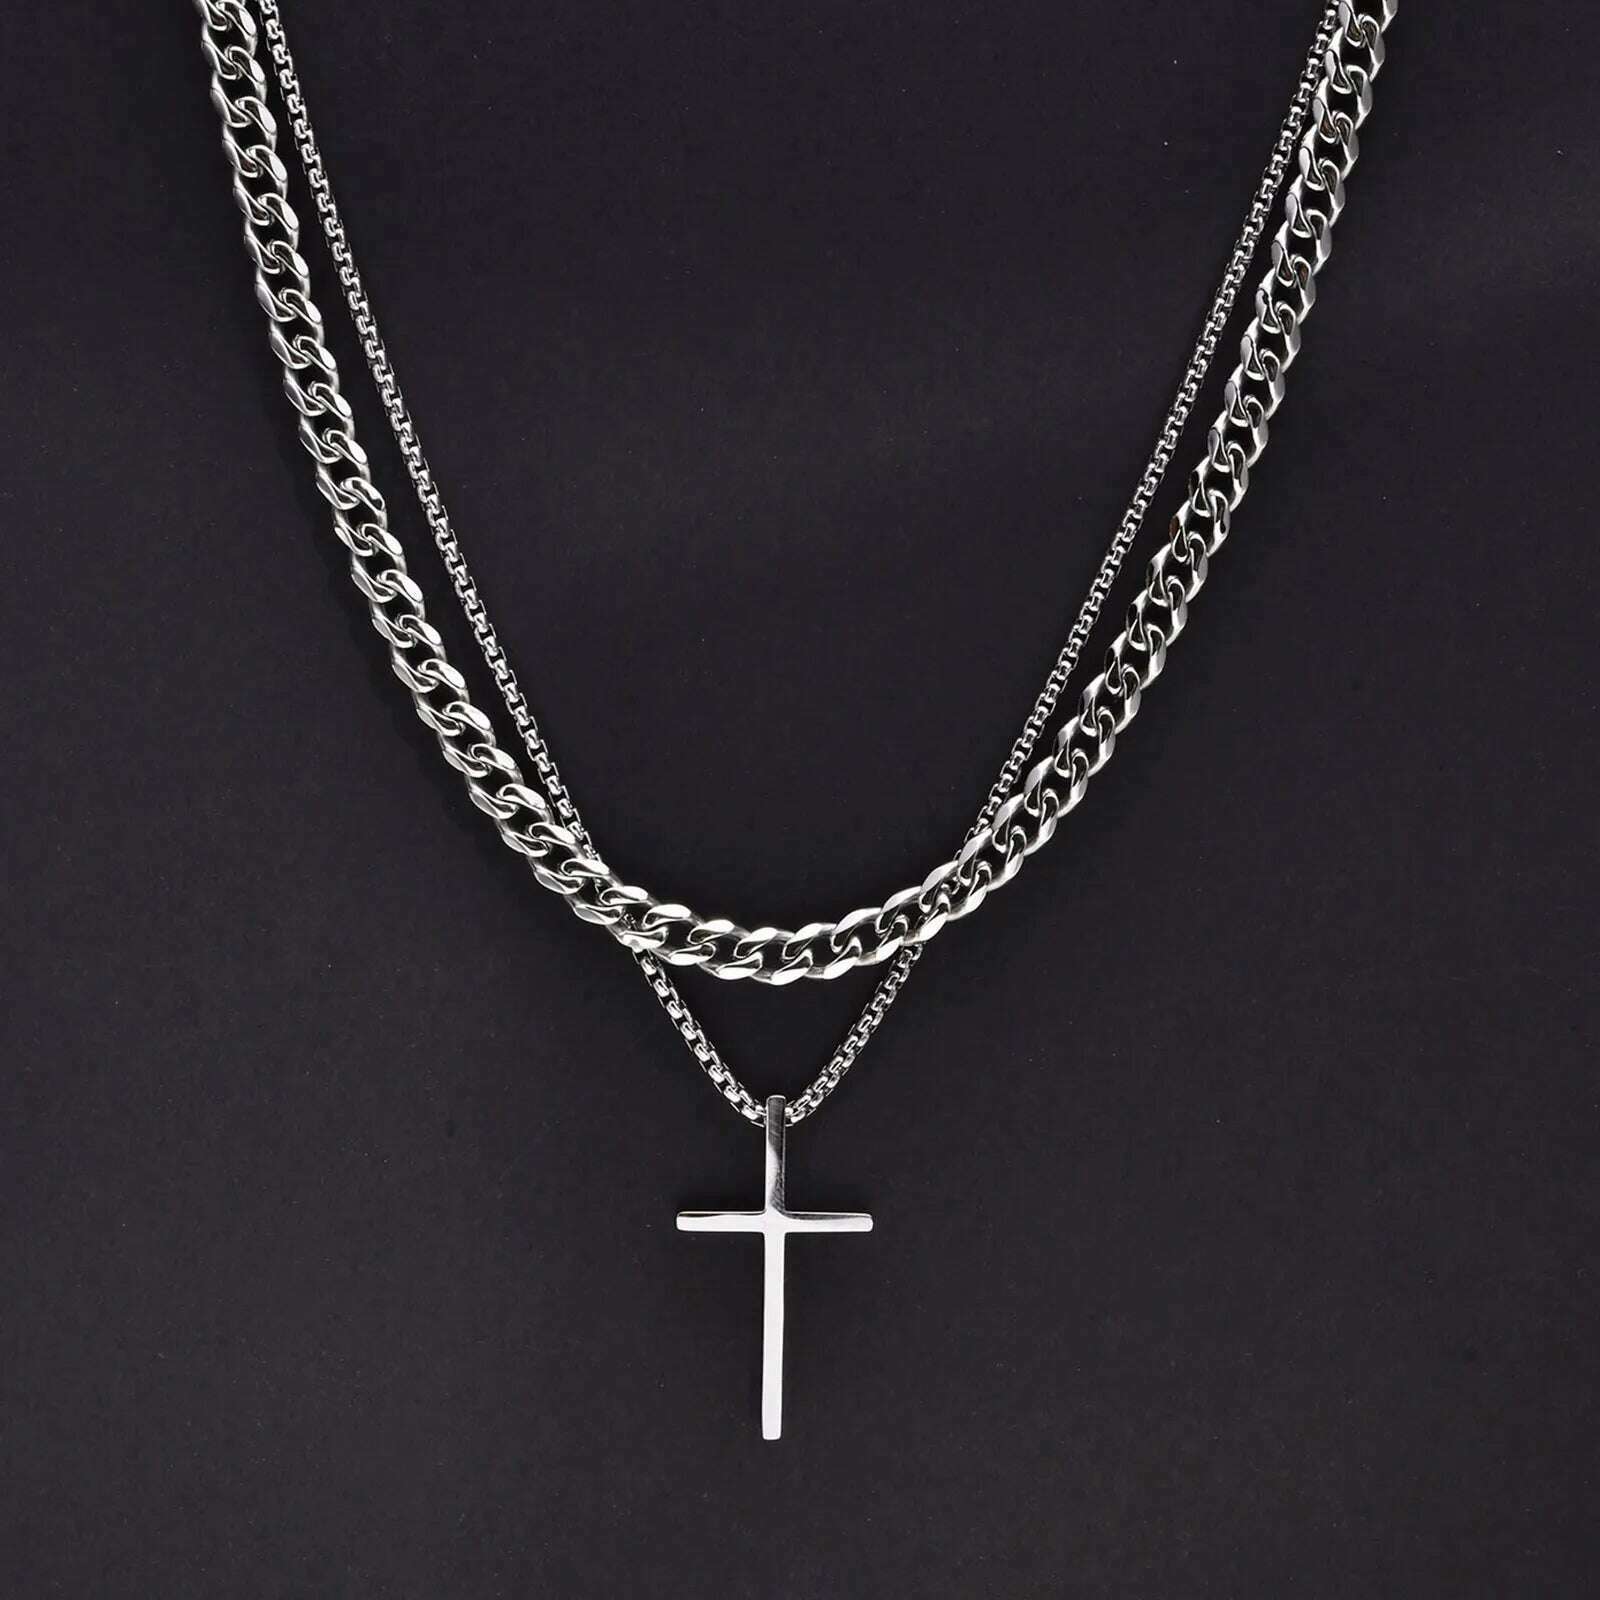 KIMLUD, Vnox Mens Cross Necklaces, Stainless Steel Layered Plain Cross Pendant, Rope Box Chain Necklace, Simple Prayer Jesus Collar, NC-1035S NC-003S-55, KIMLUD Womens Clothes